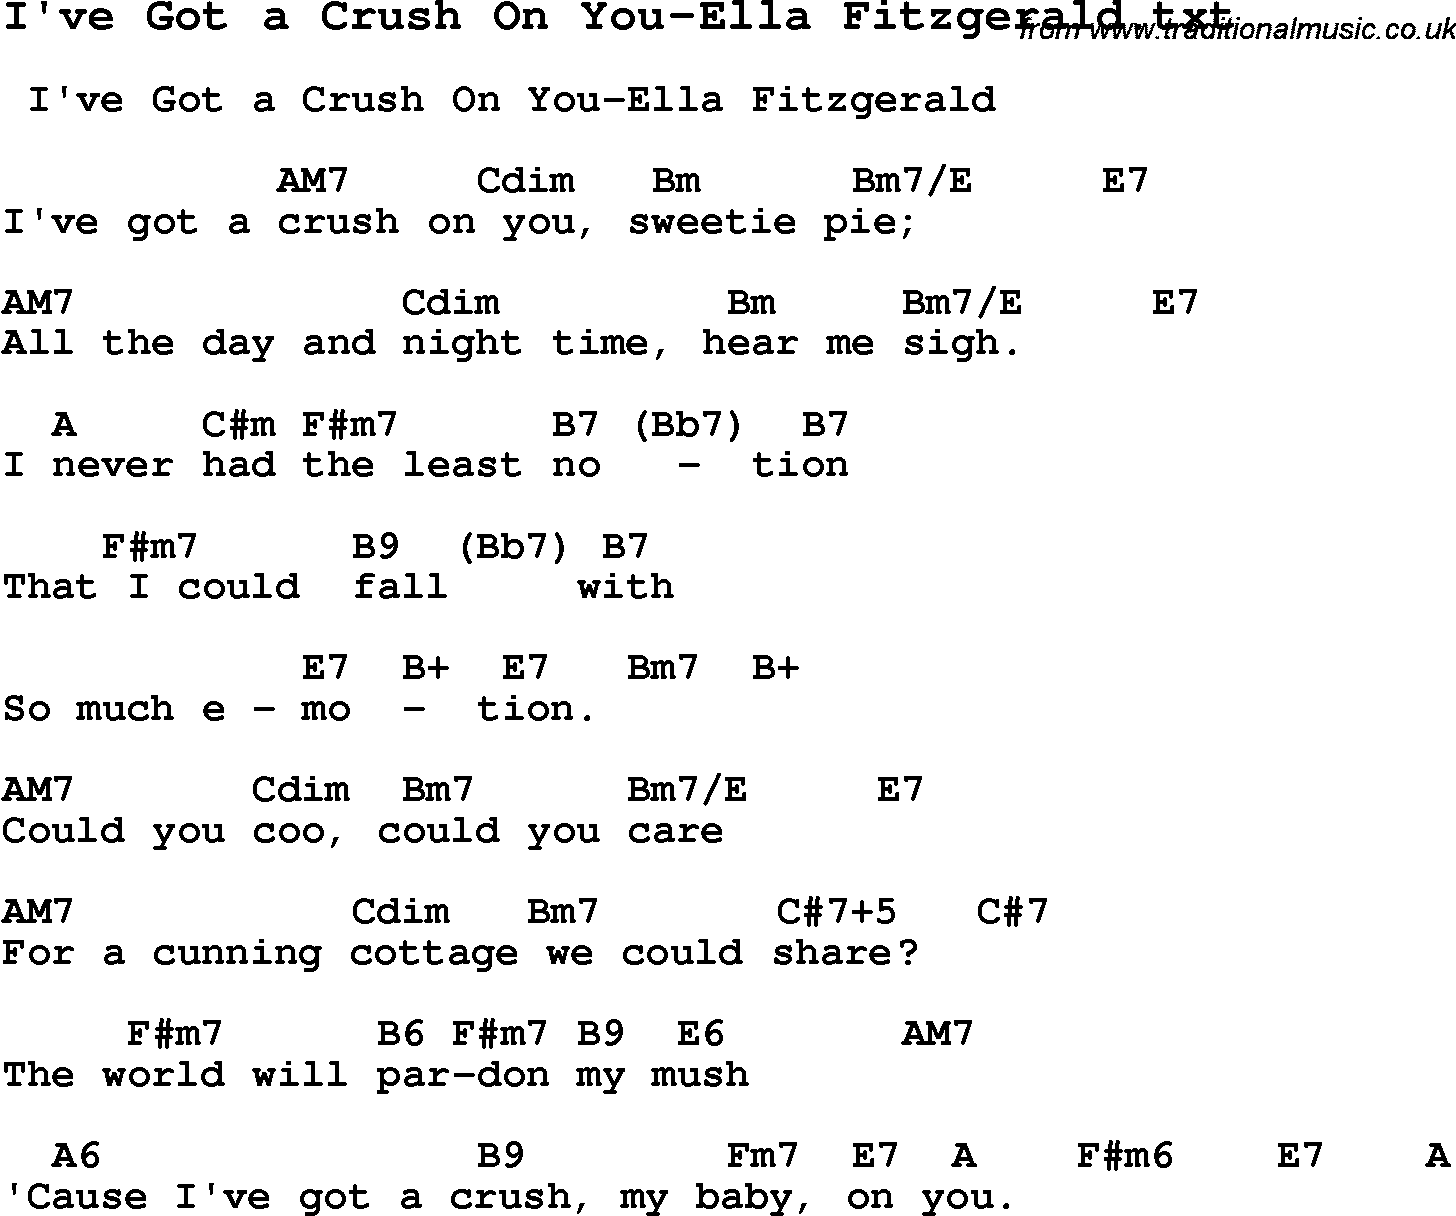 Jazz Song from top bands and vocal artists with chords, tabs and lyrics - I've Got a Crush On You-Ella Fitzgerald